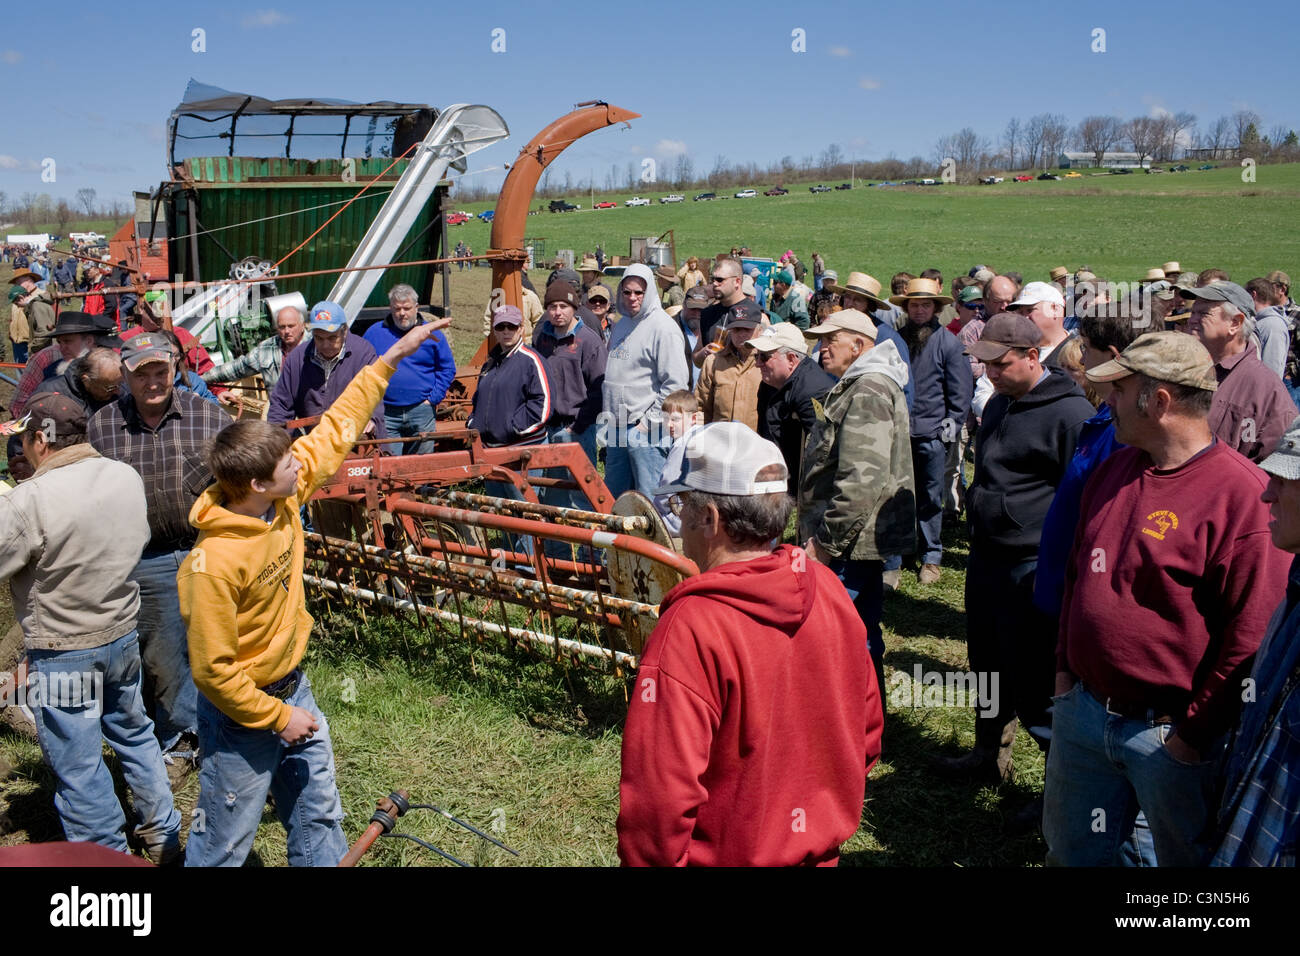 Young teen handles auction of farm equipment in Mohawk valley of central New York State Stock Photo